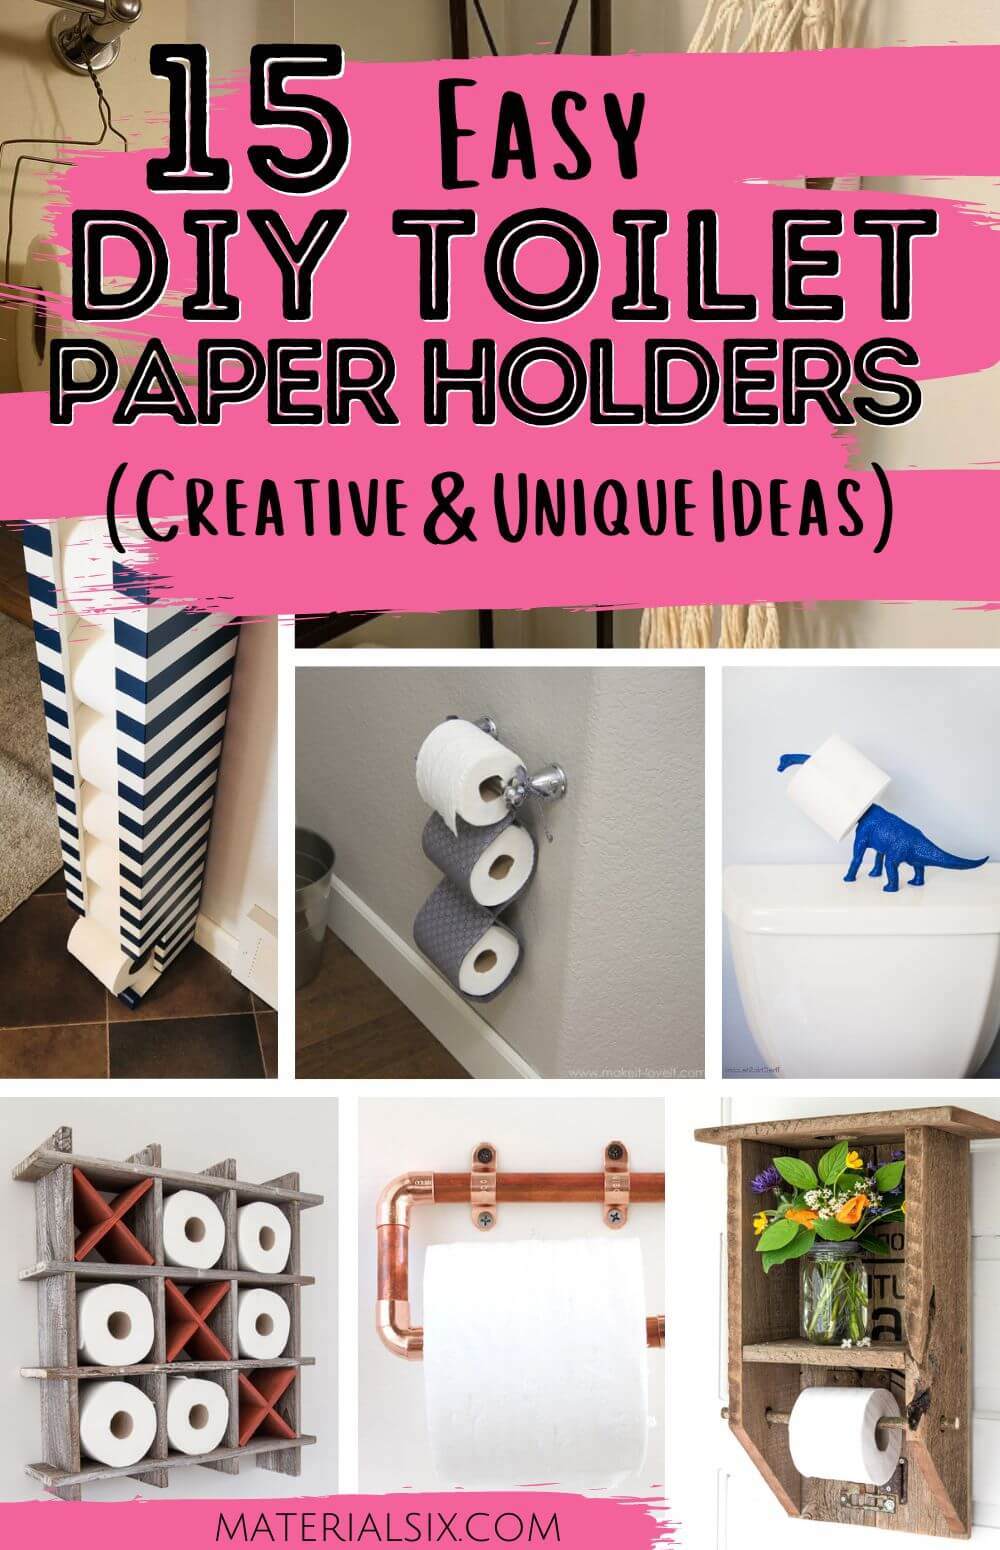 15 Creative and Easy DIY Toilet Paper Holders (1)